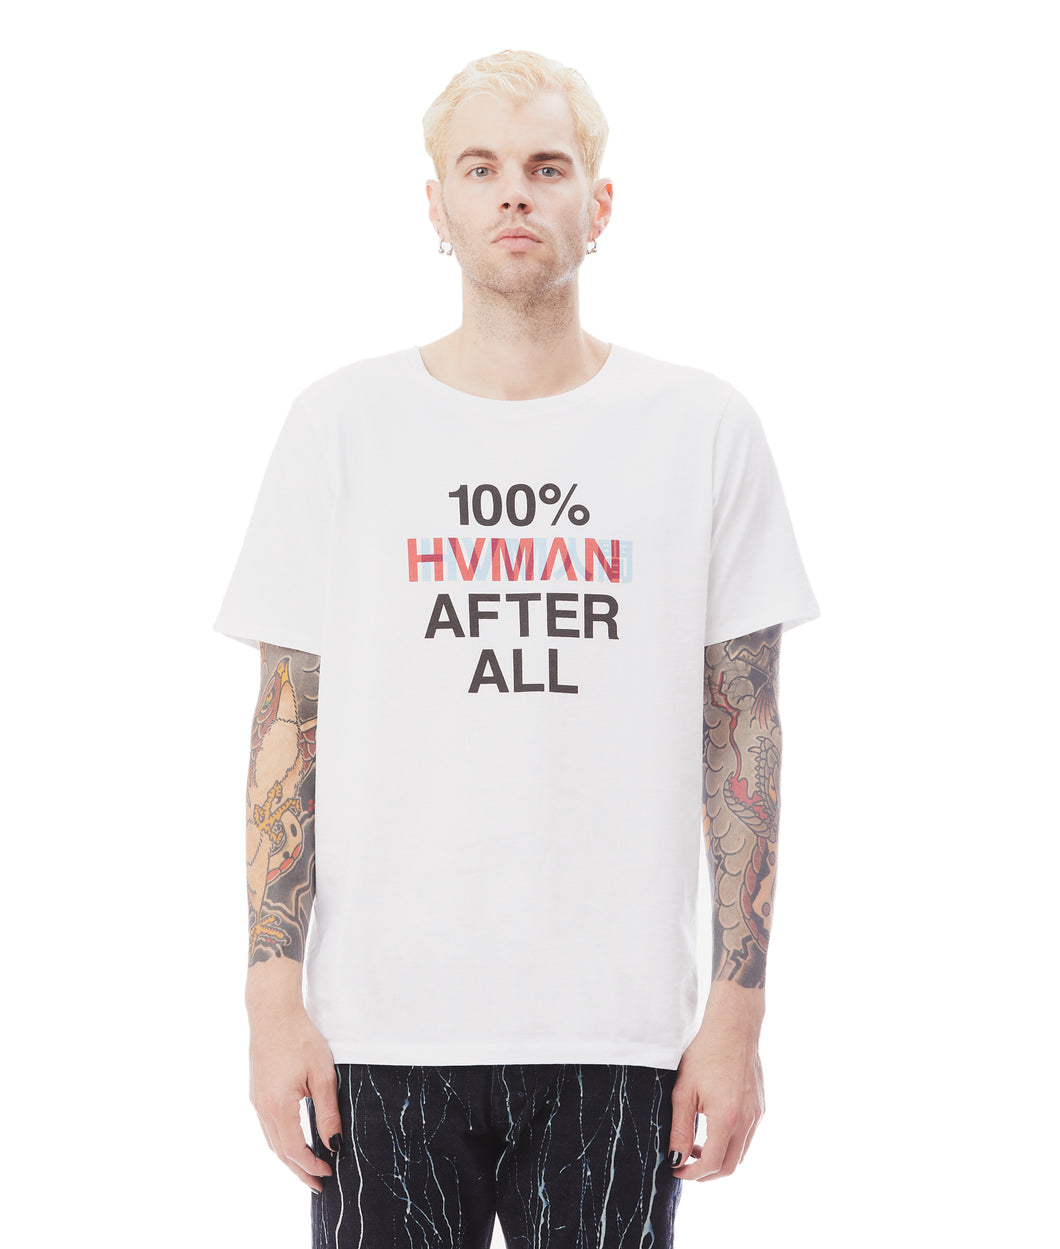 HUMAN AFTER ALL CREW NECK TEE IN WHITE